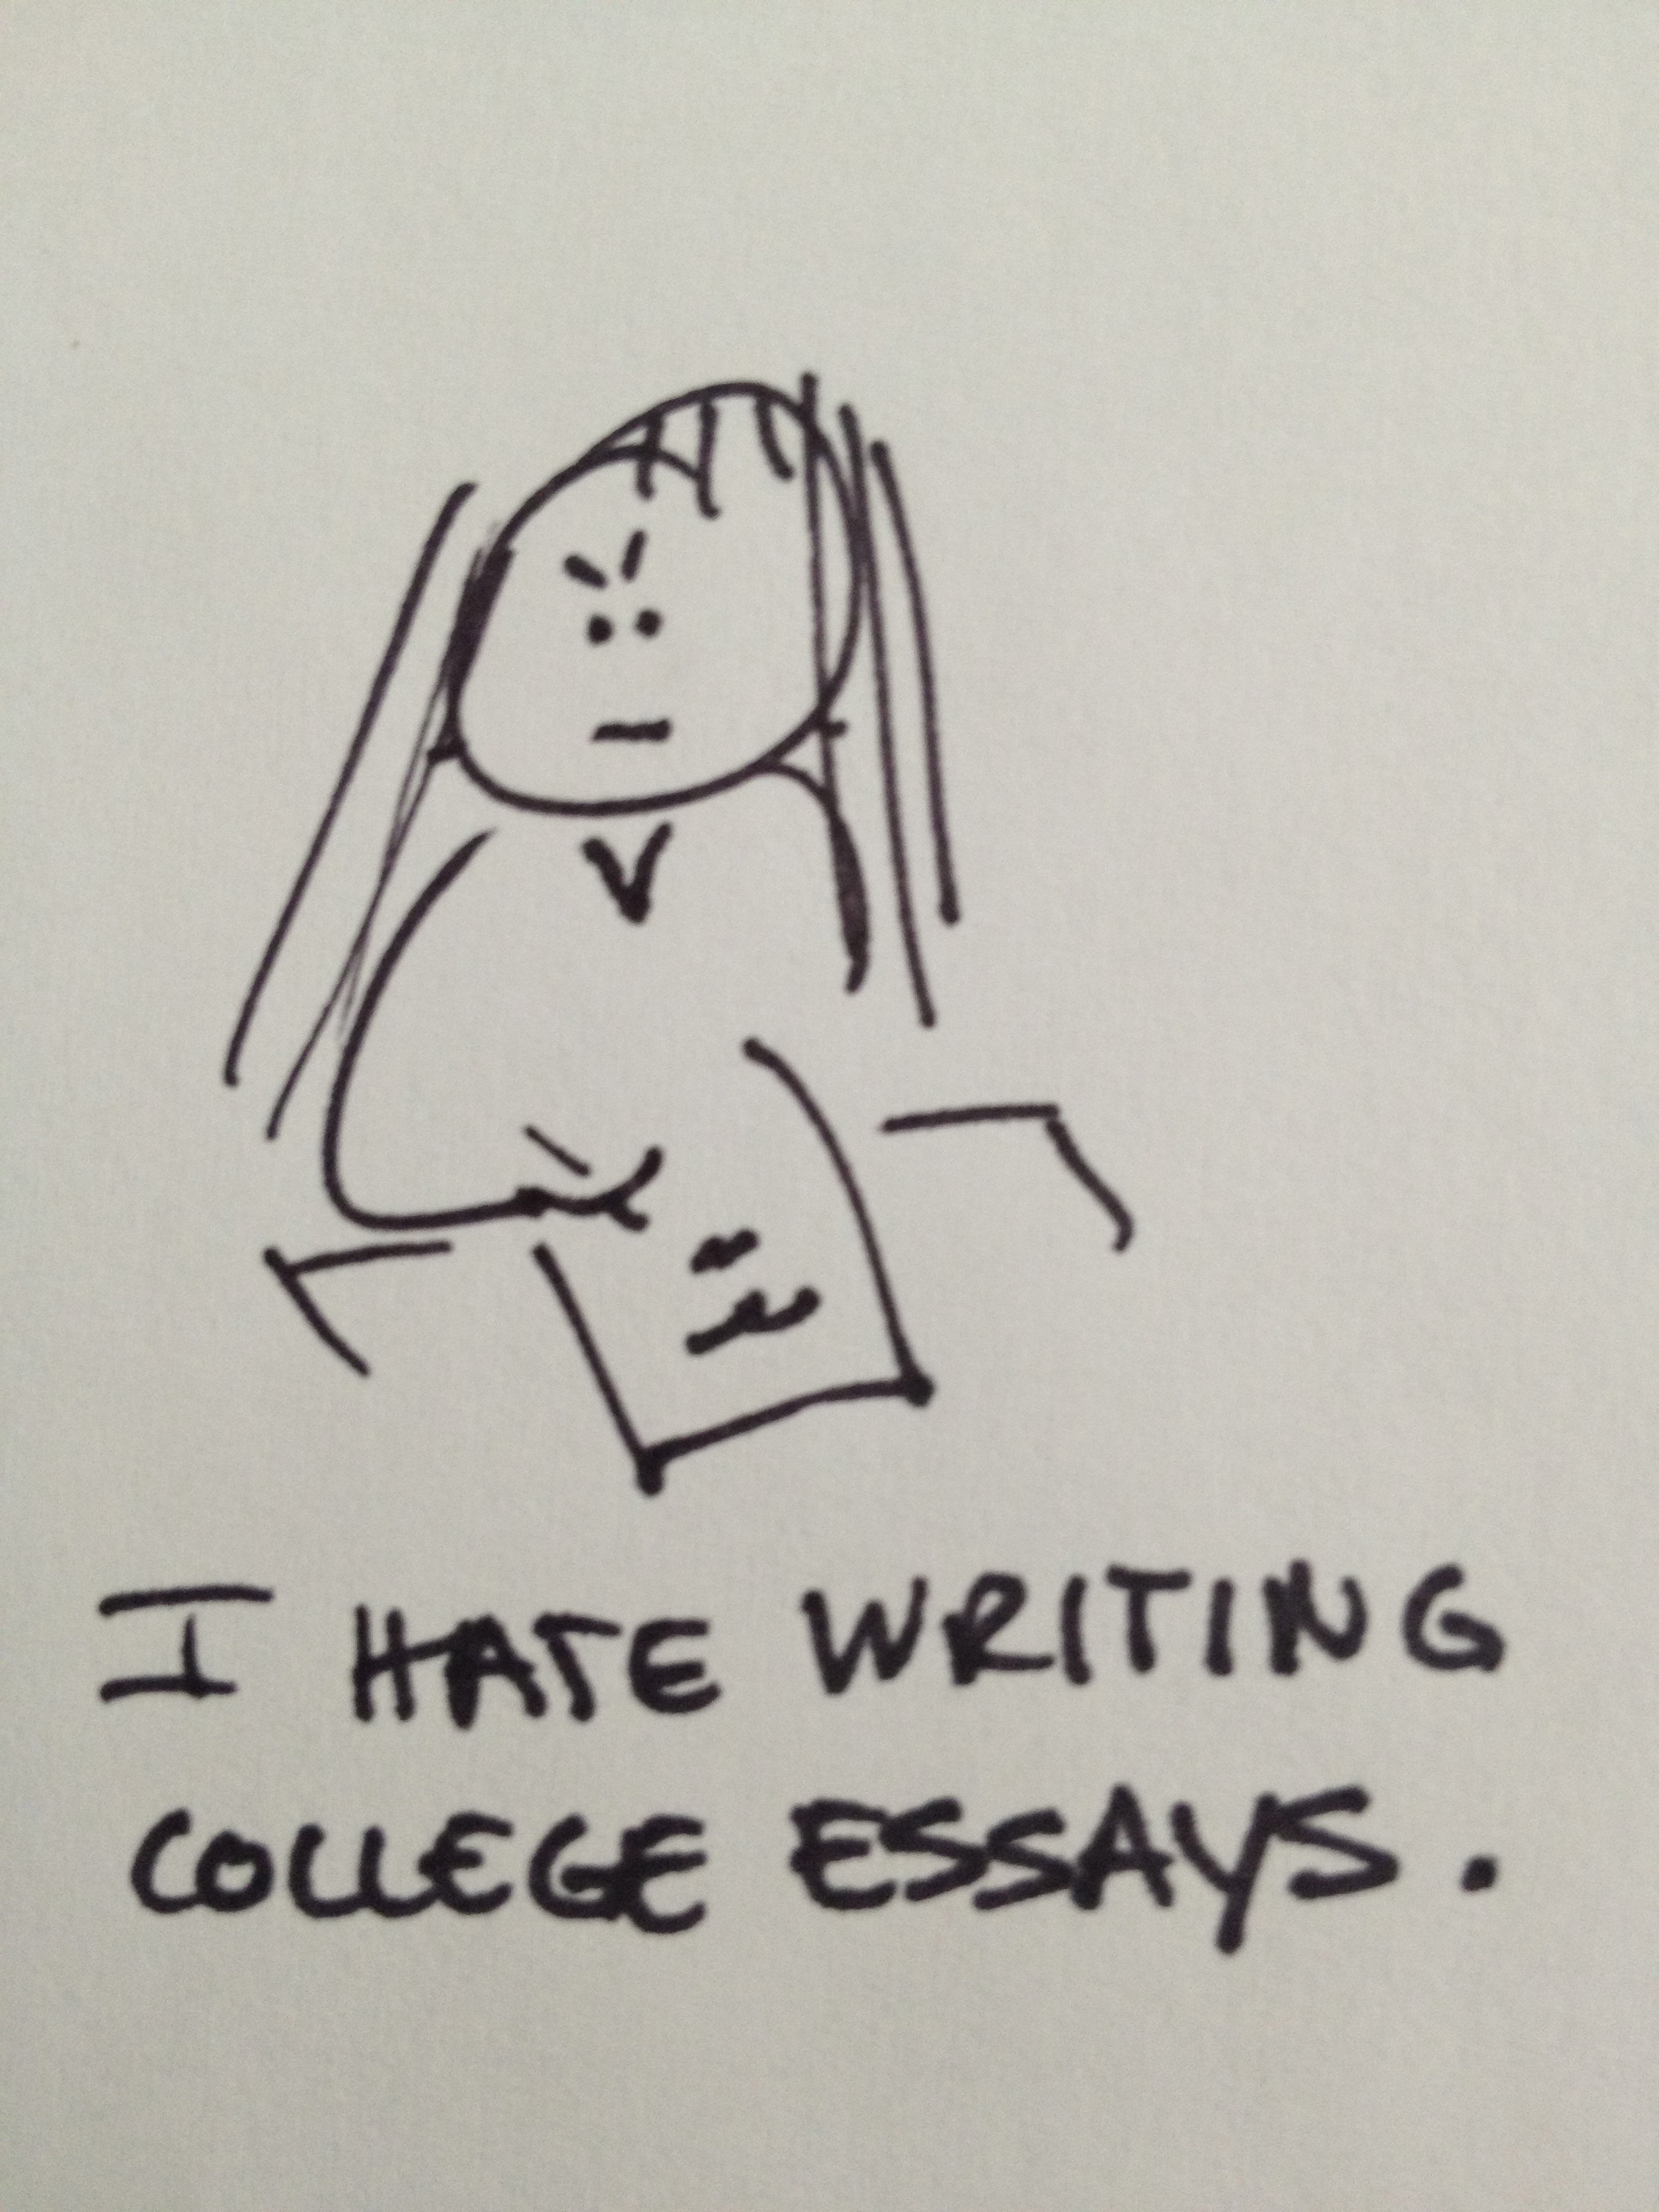 Writing the college essay: Your life in 65 words or less